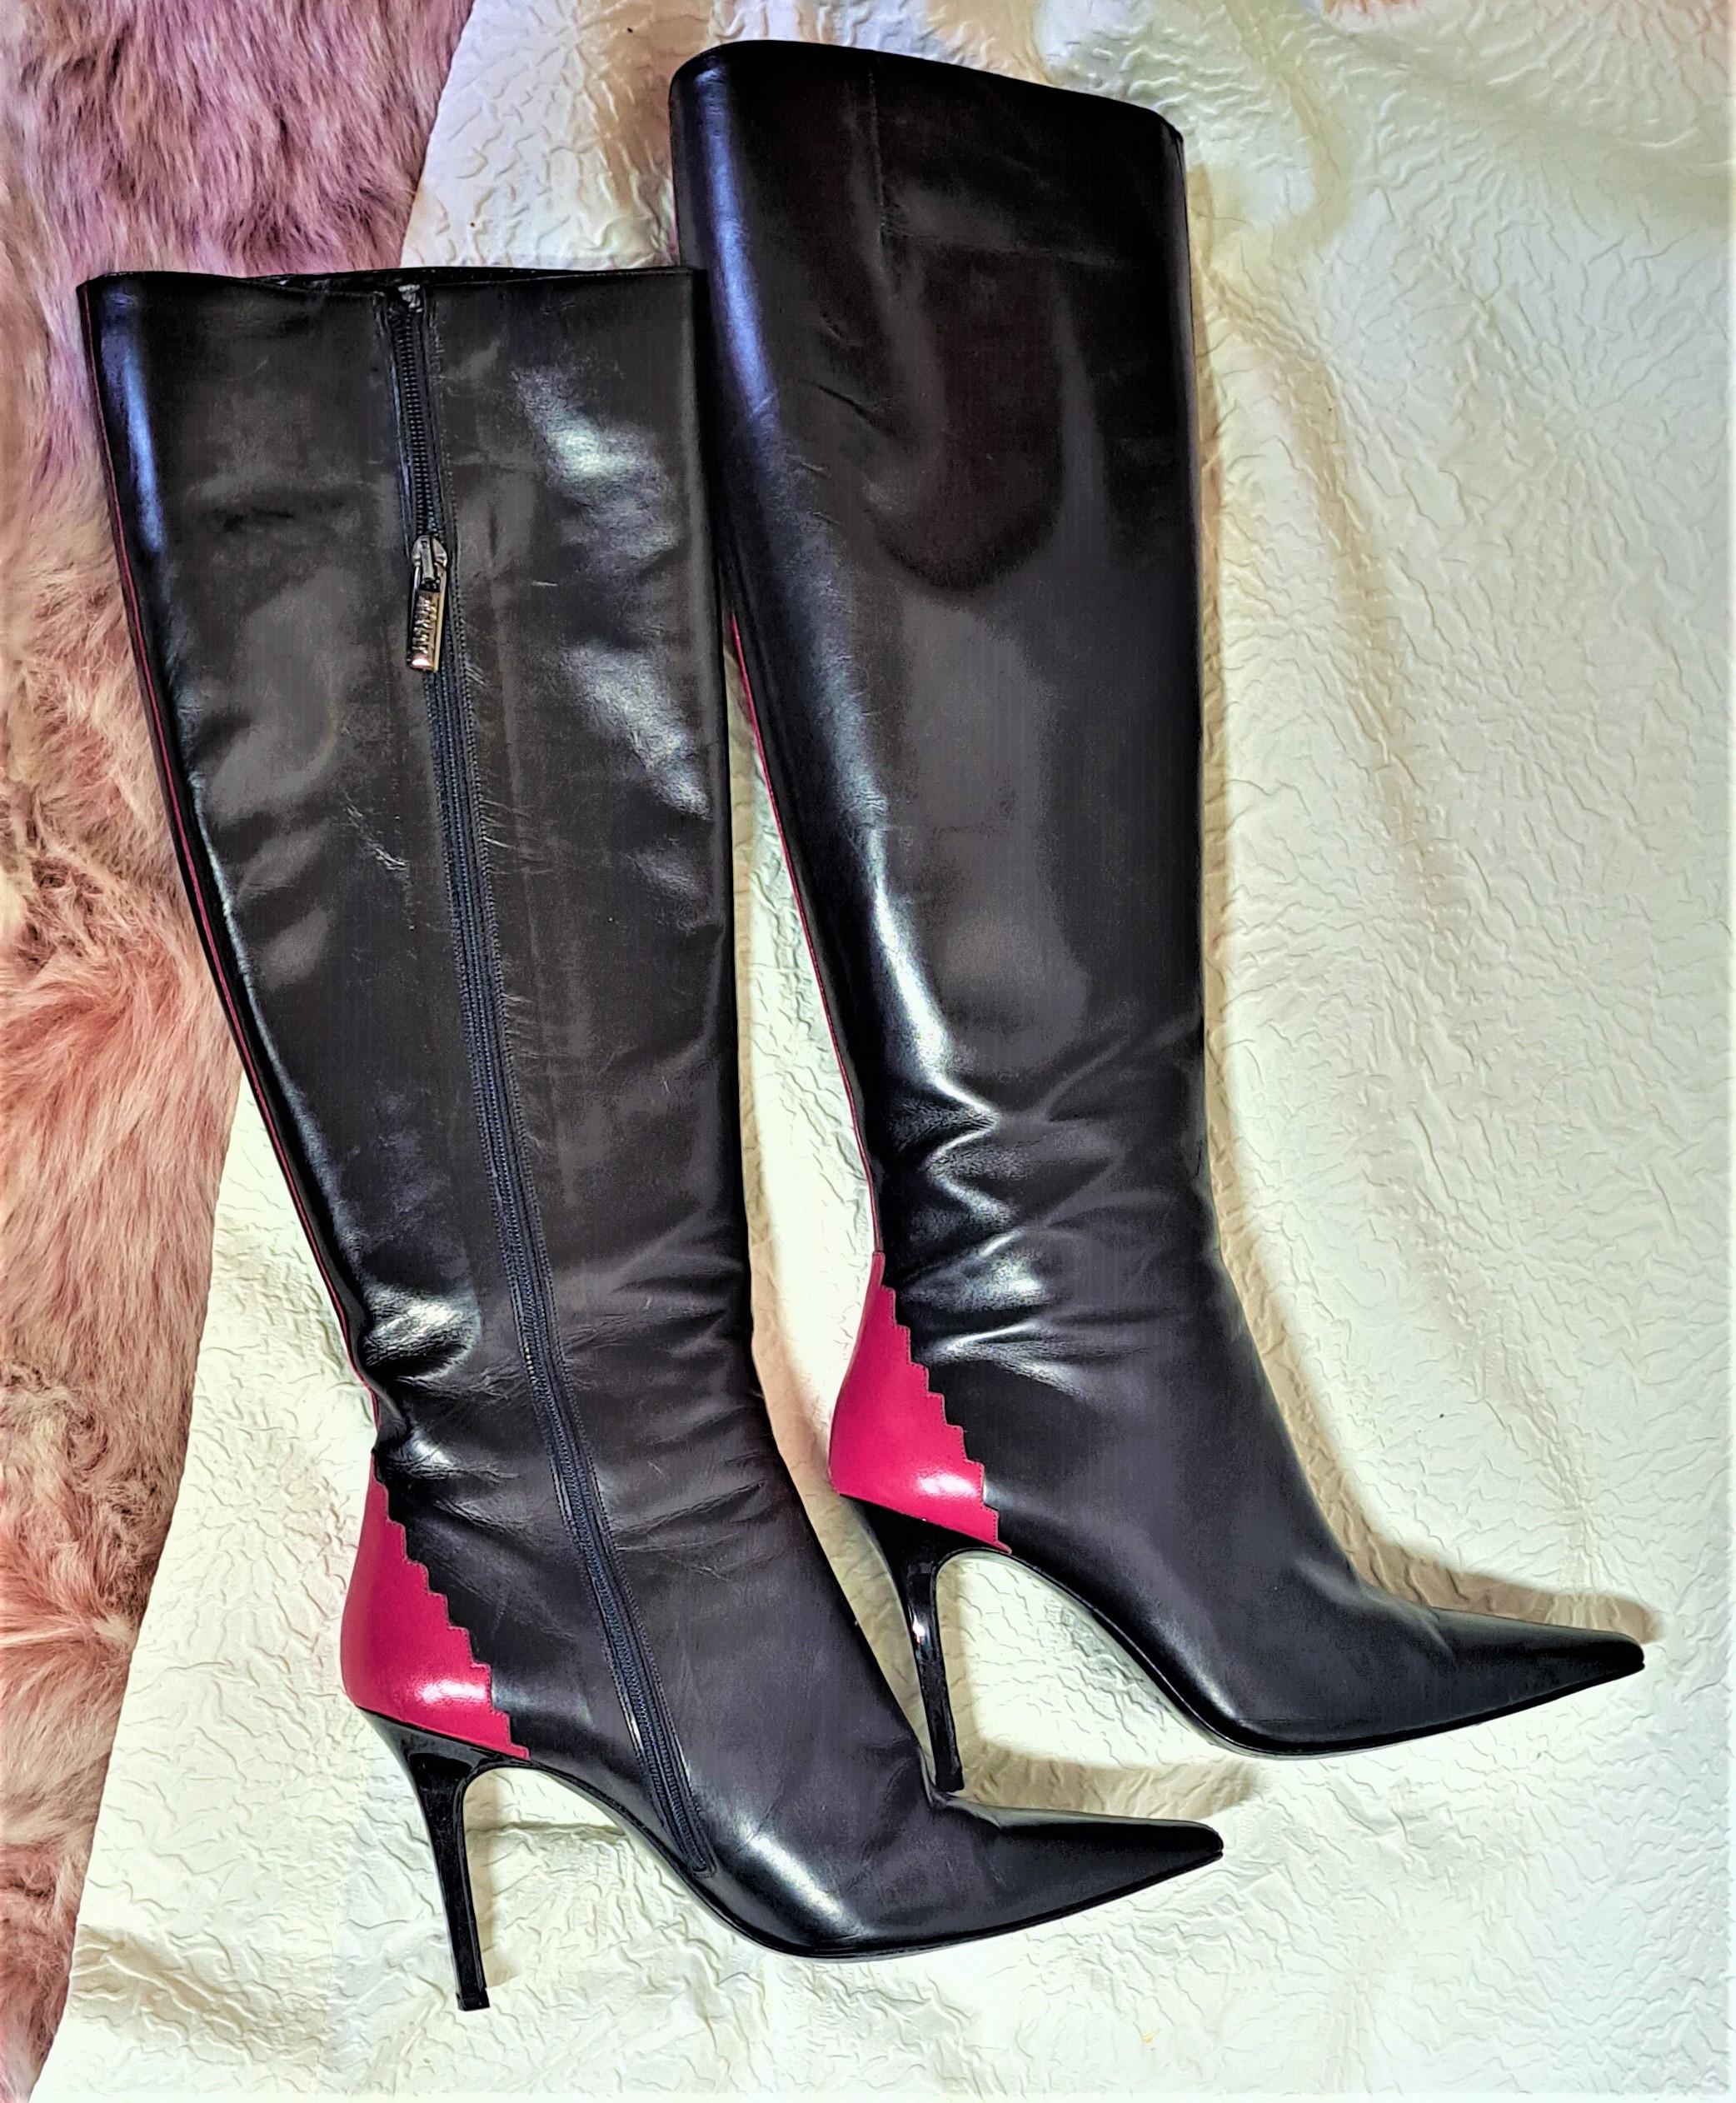 Women's or Men's Monica by Bruno Magli High Heels Black Leather Boots with Fuchsia For Sale